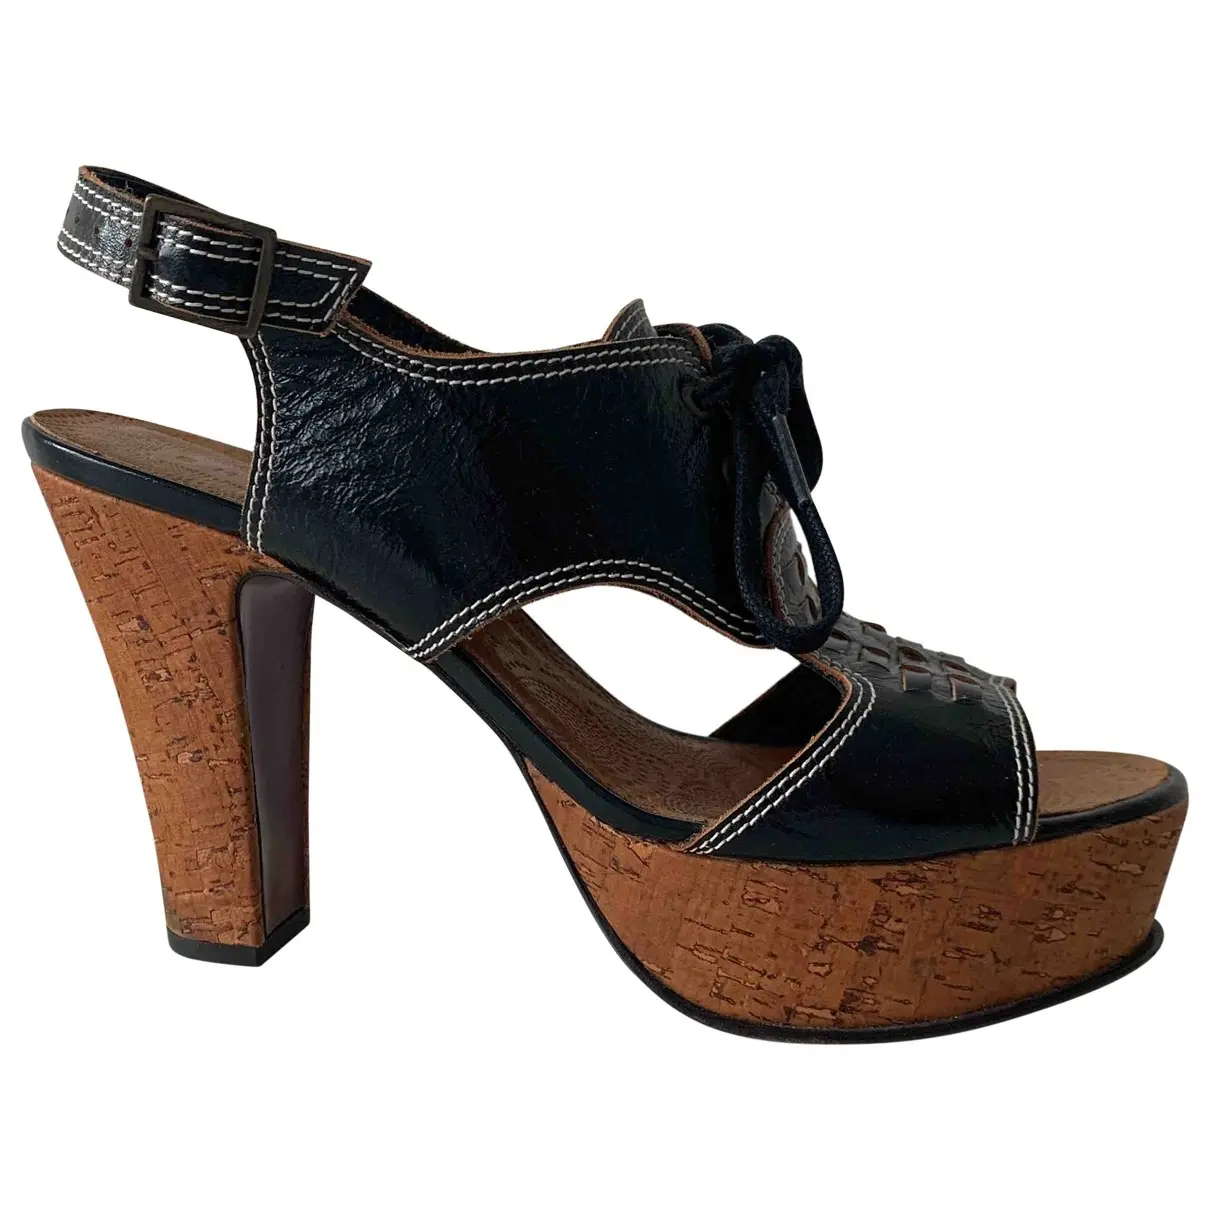 Leather sandal Chie Mihara